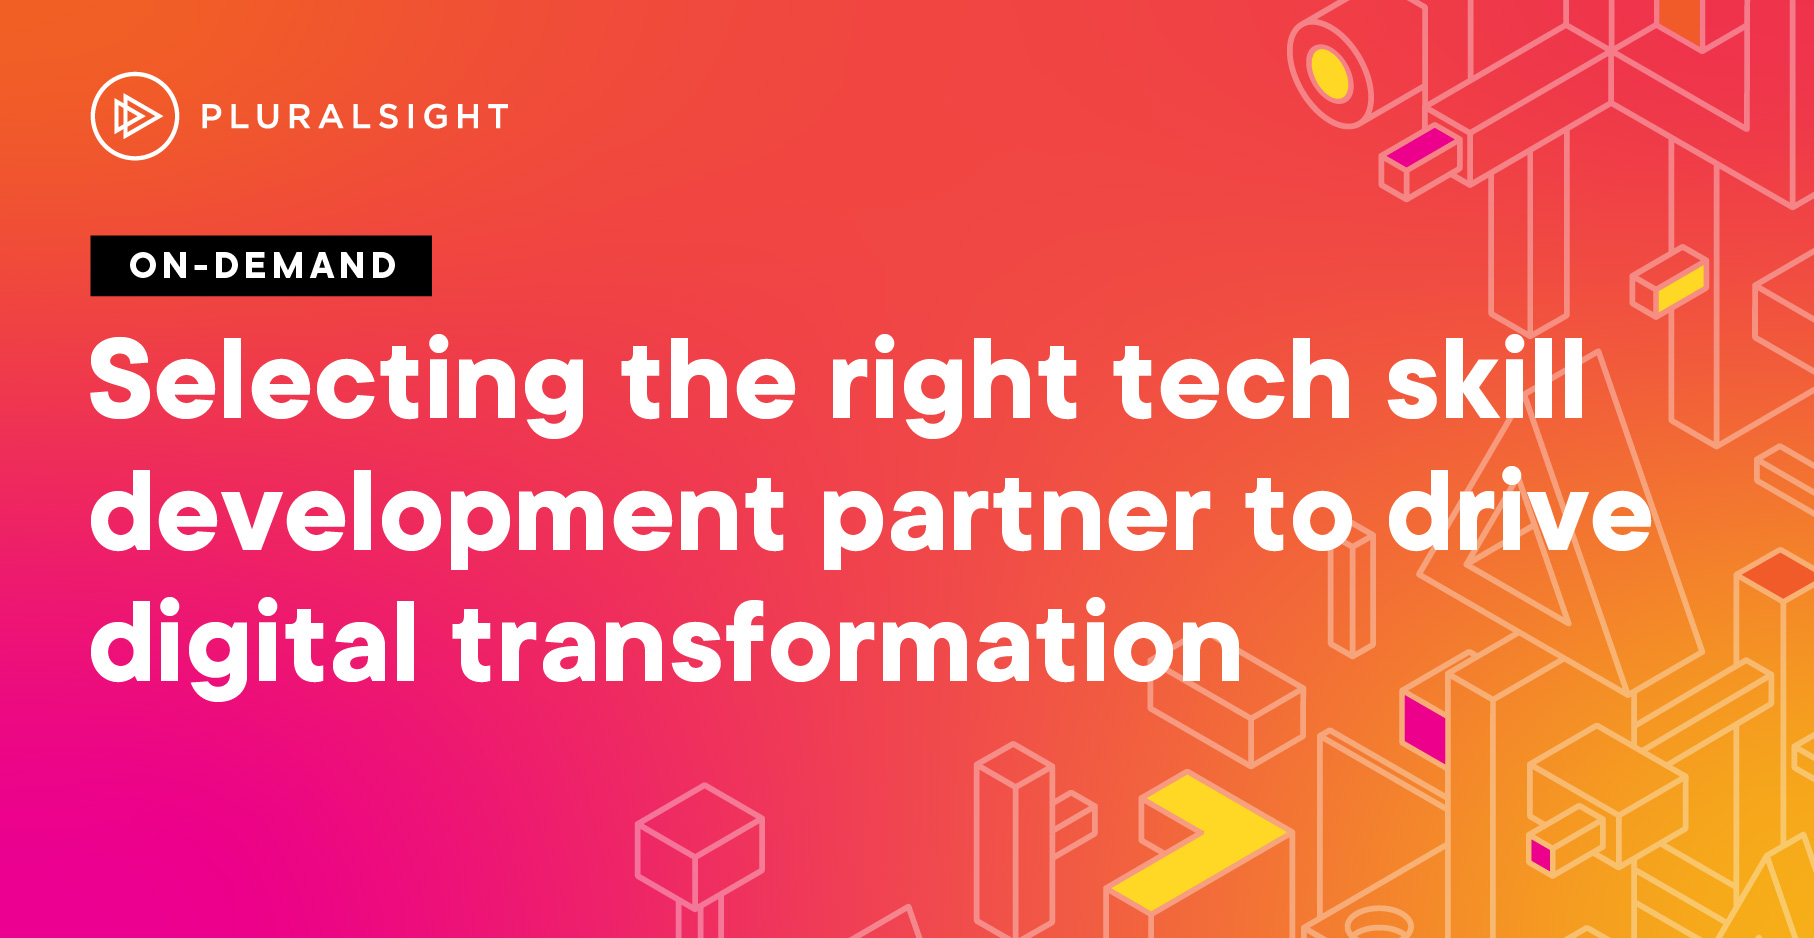 Selecting the right tech skill development partner to drive digital transformation